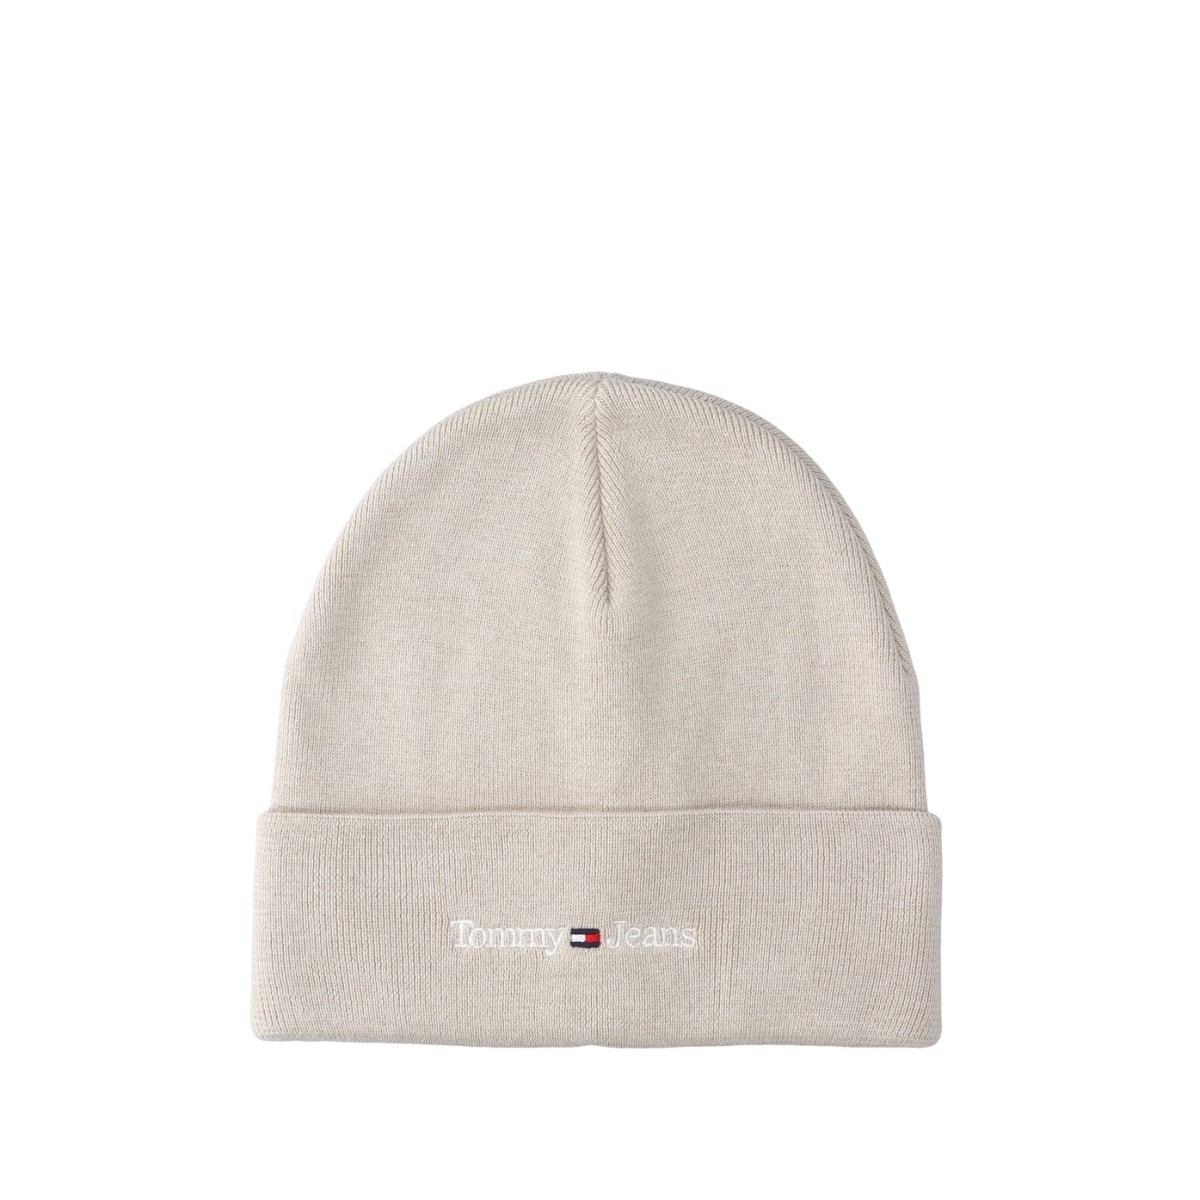 Tommy hilfiger Cappello Avorio AW0AW15473